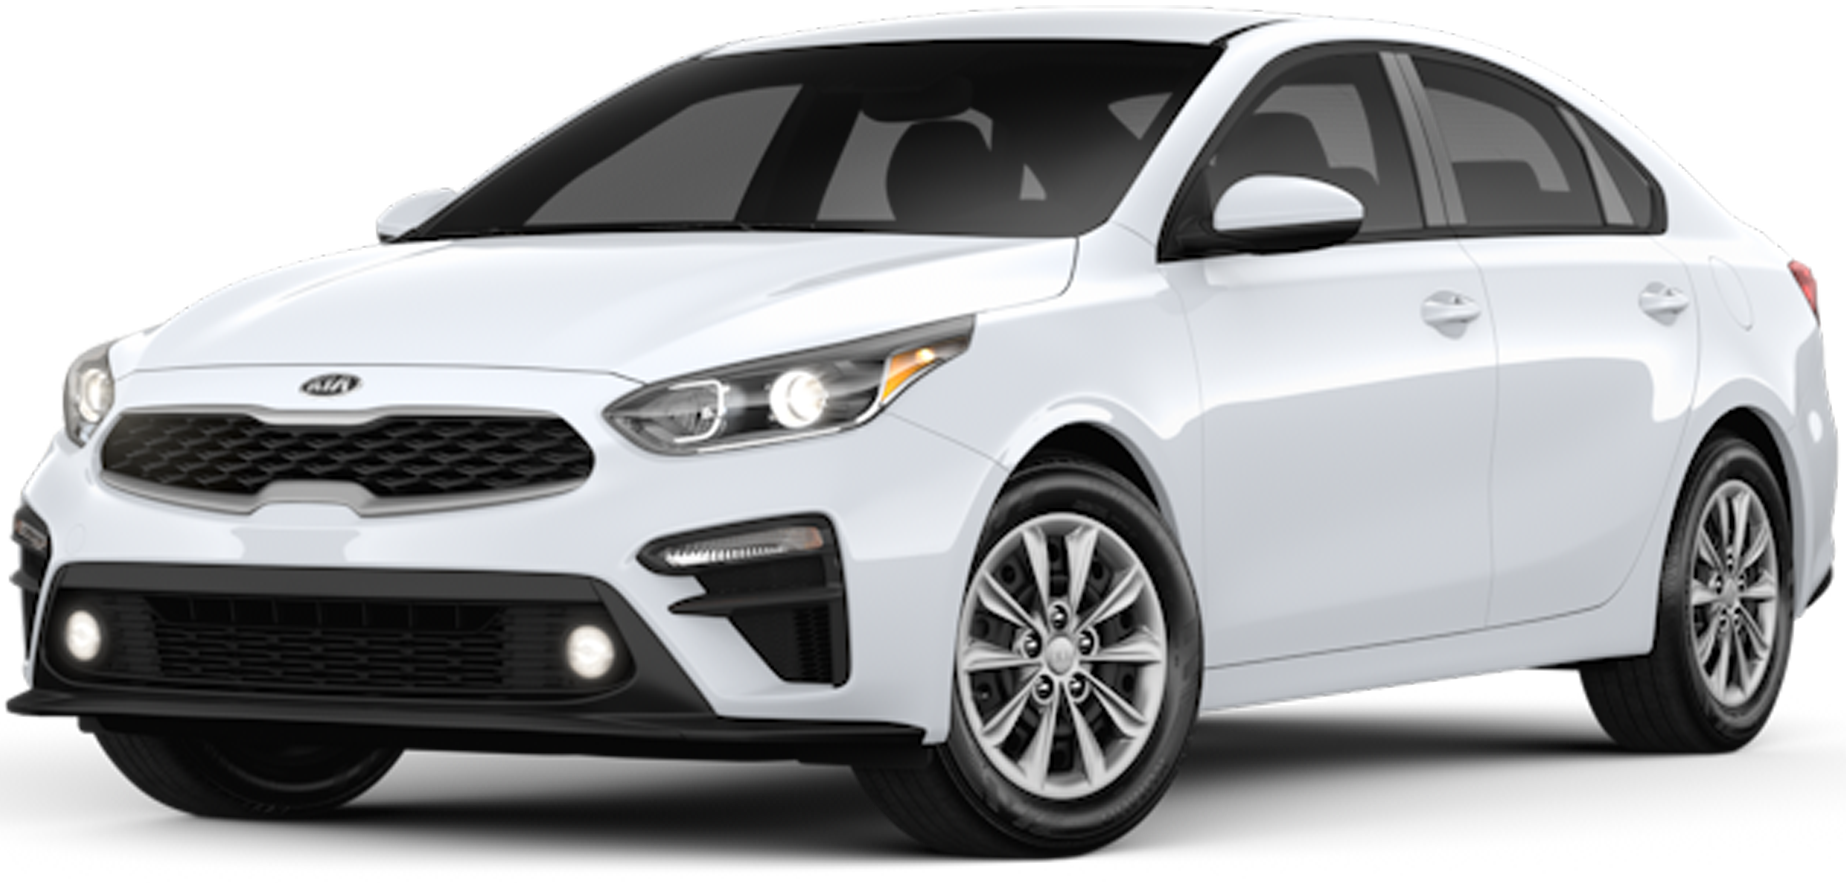 2020 Kia Forte Incentives, Specials & Offers in Orchard Park NY